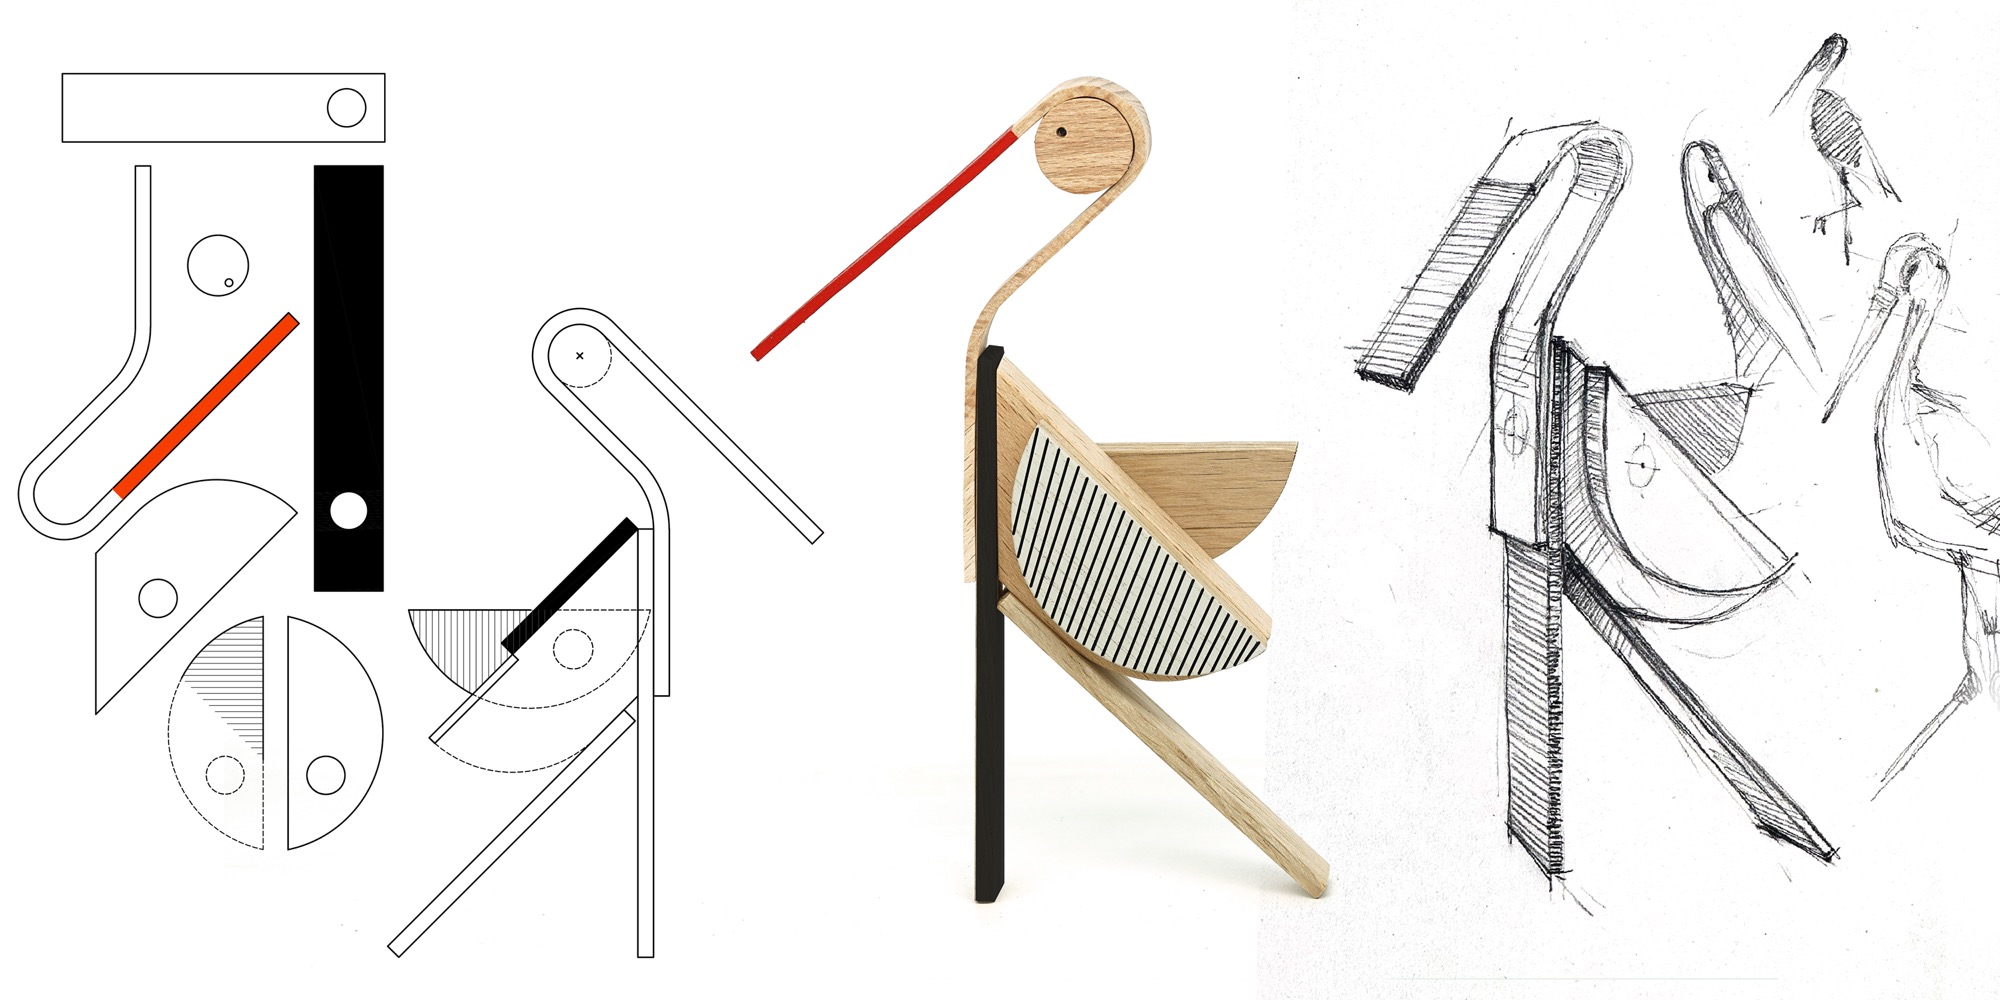 mockup sketches and renderings of a modular, geometric wooden toy of a bird